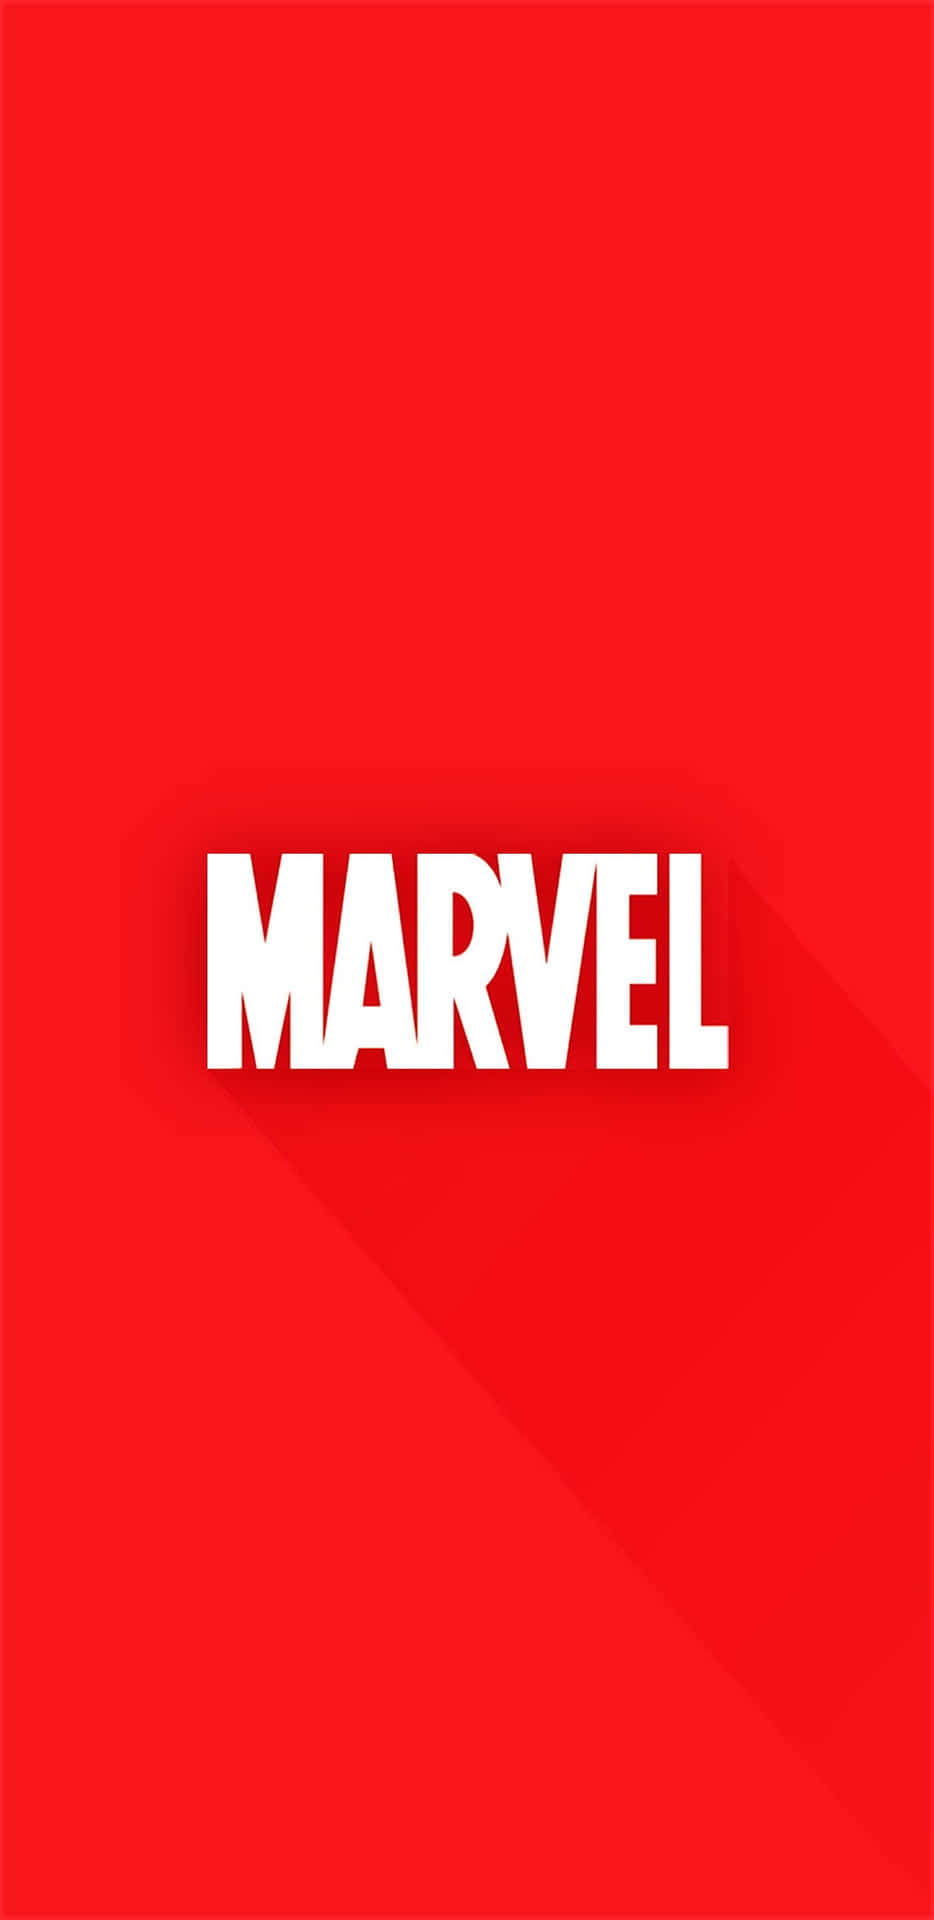 Pixel 3xl Marvel Background In Plain Red